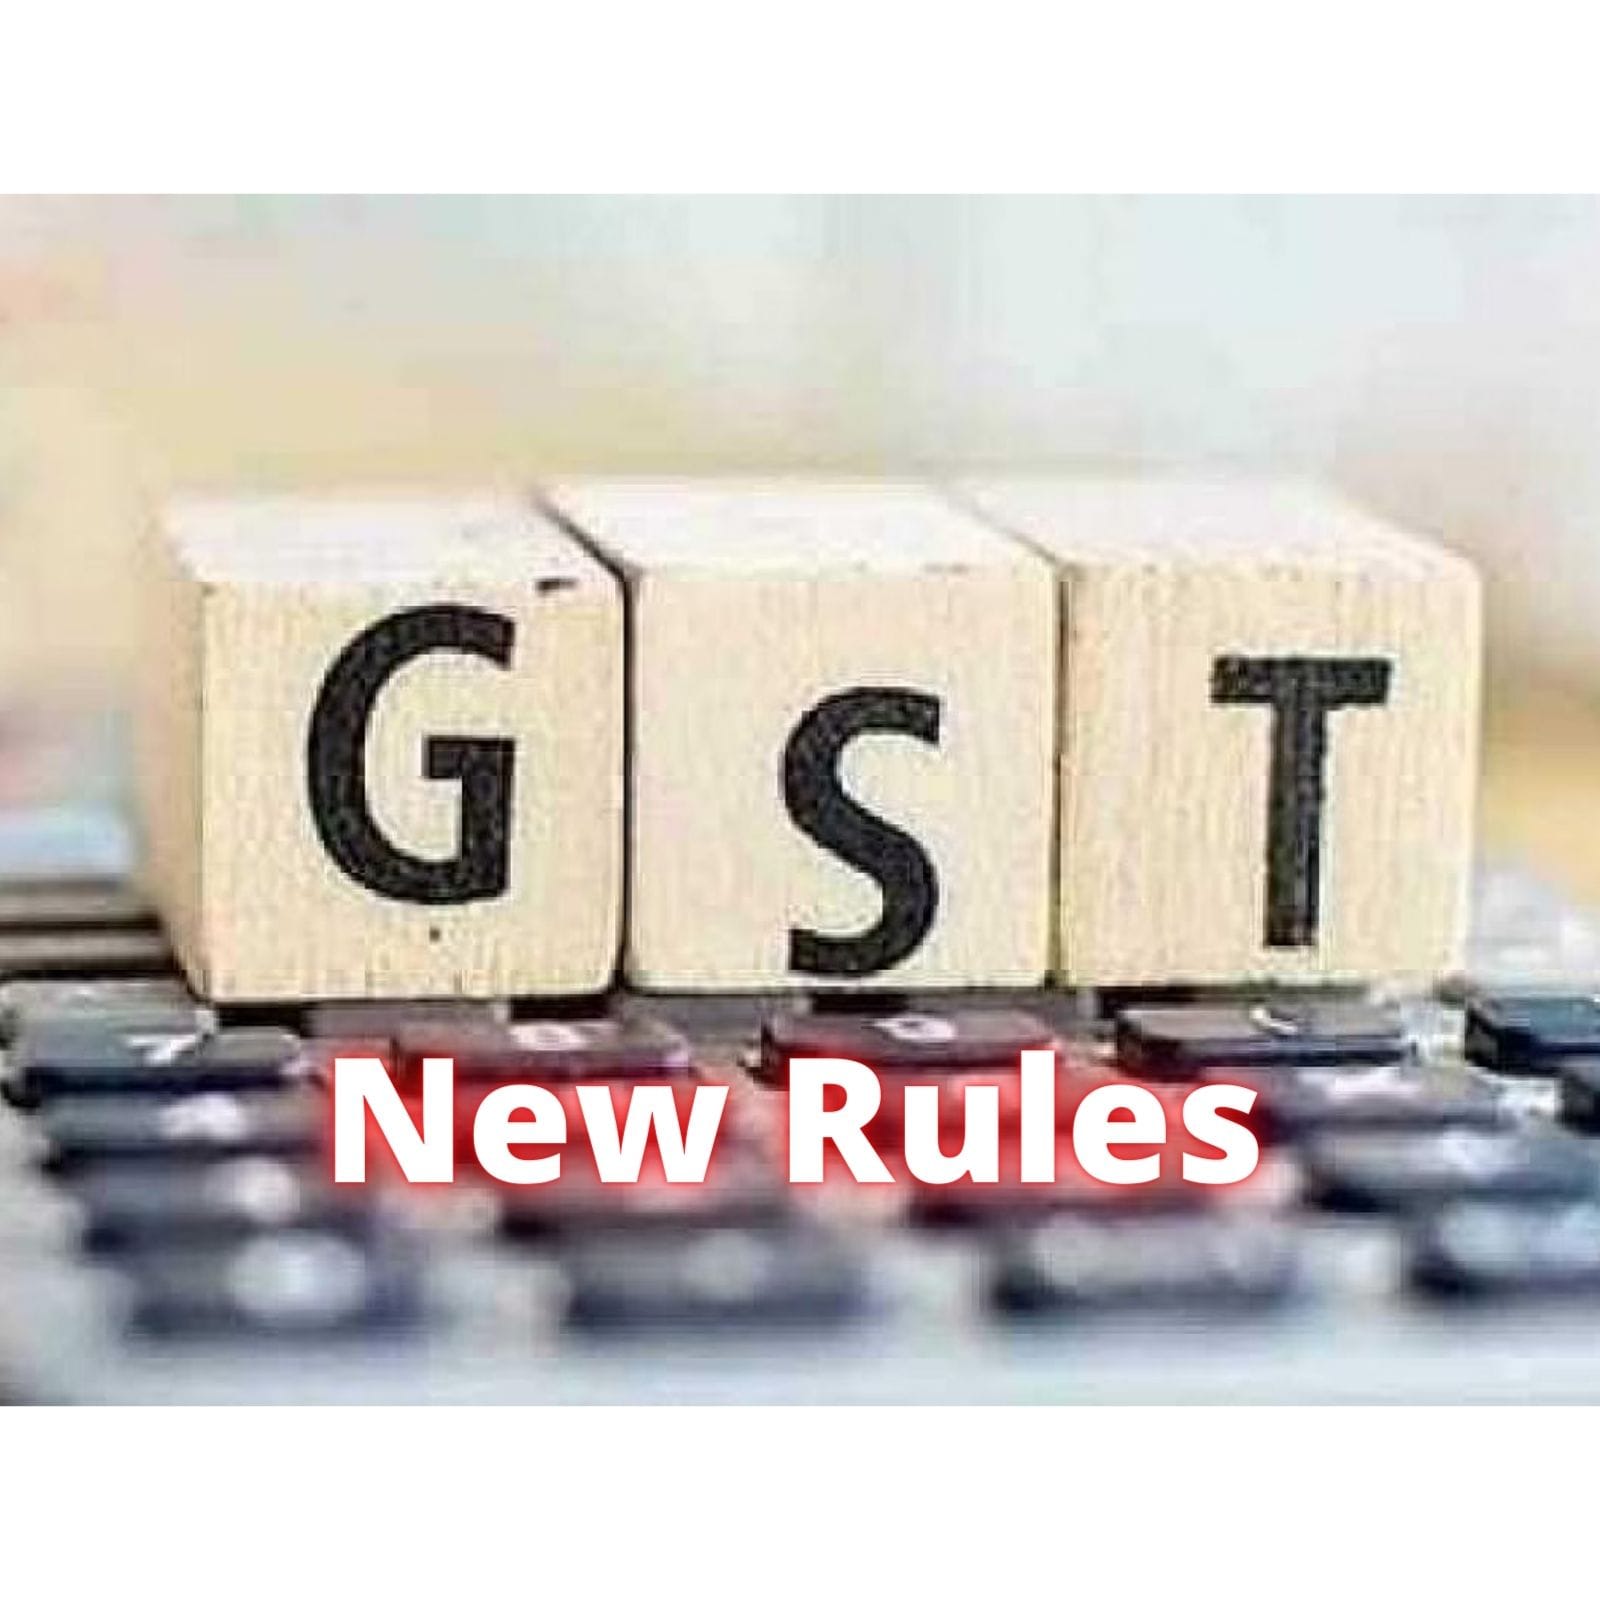 GST New rules